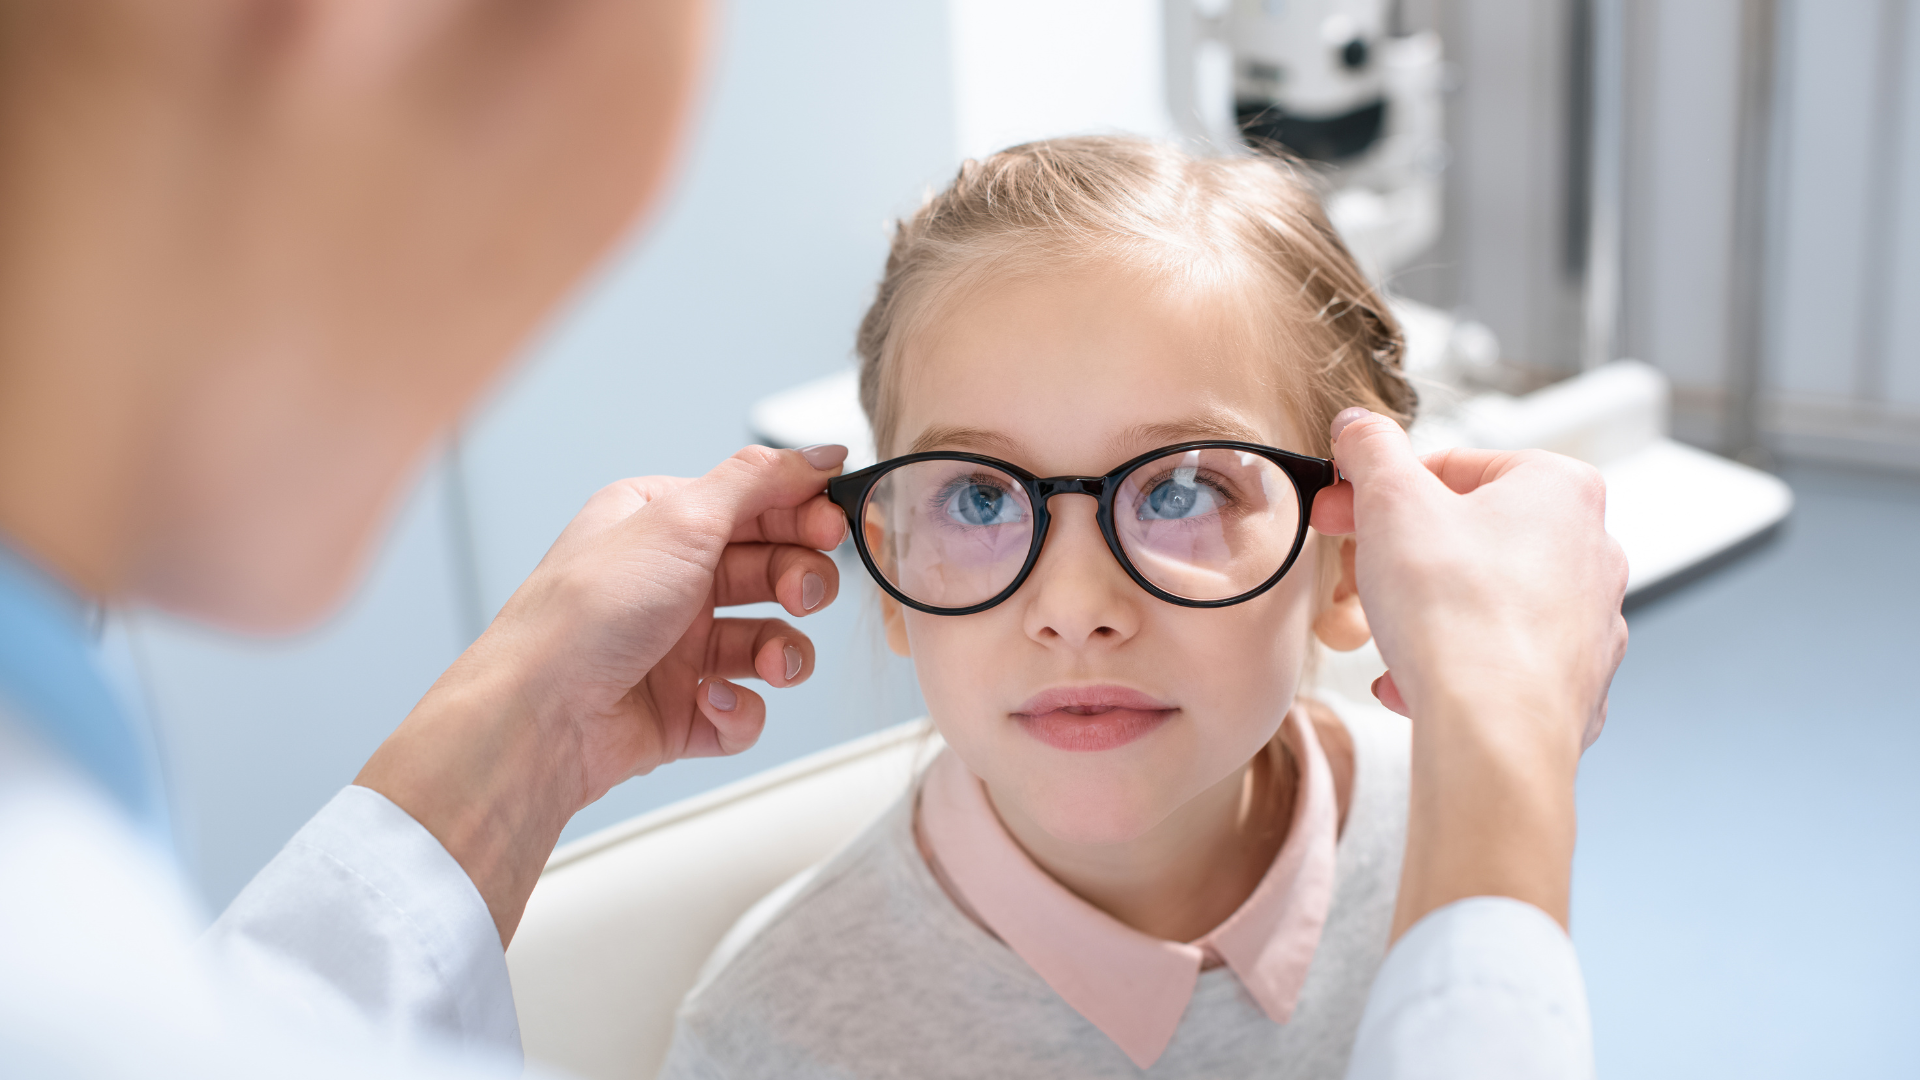 A young girl is getting her glasses checked by an optometrist.